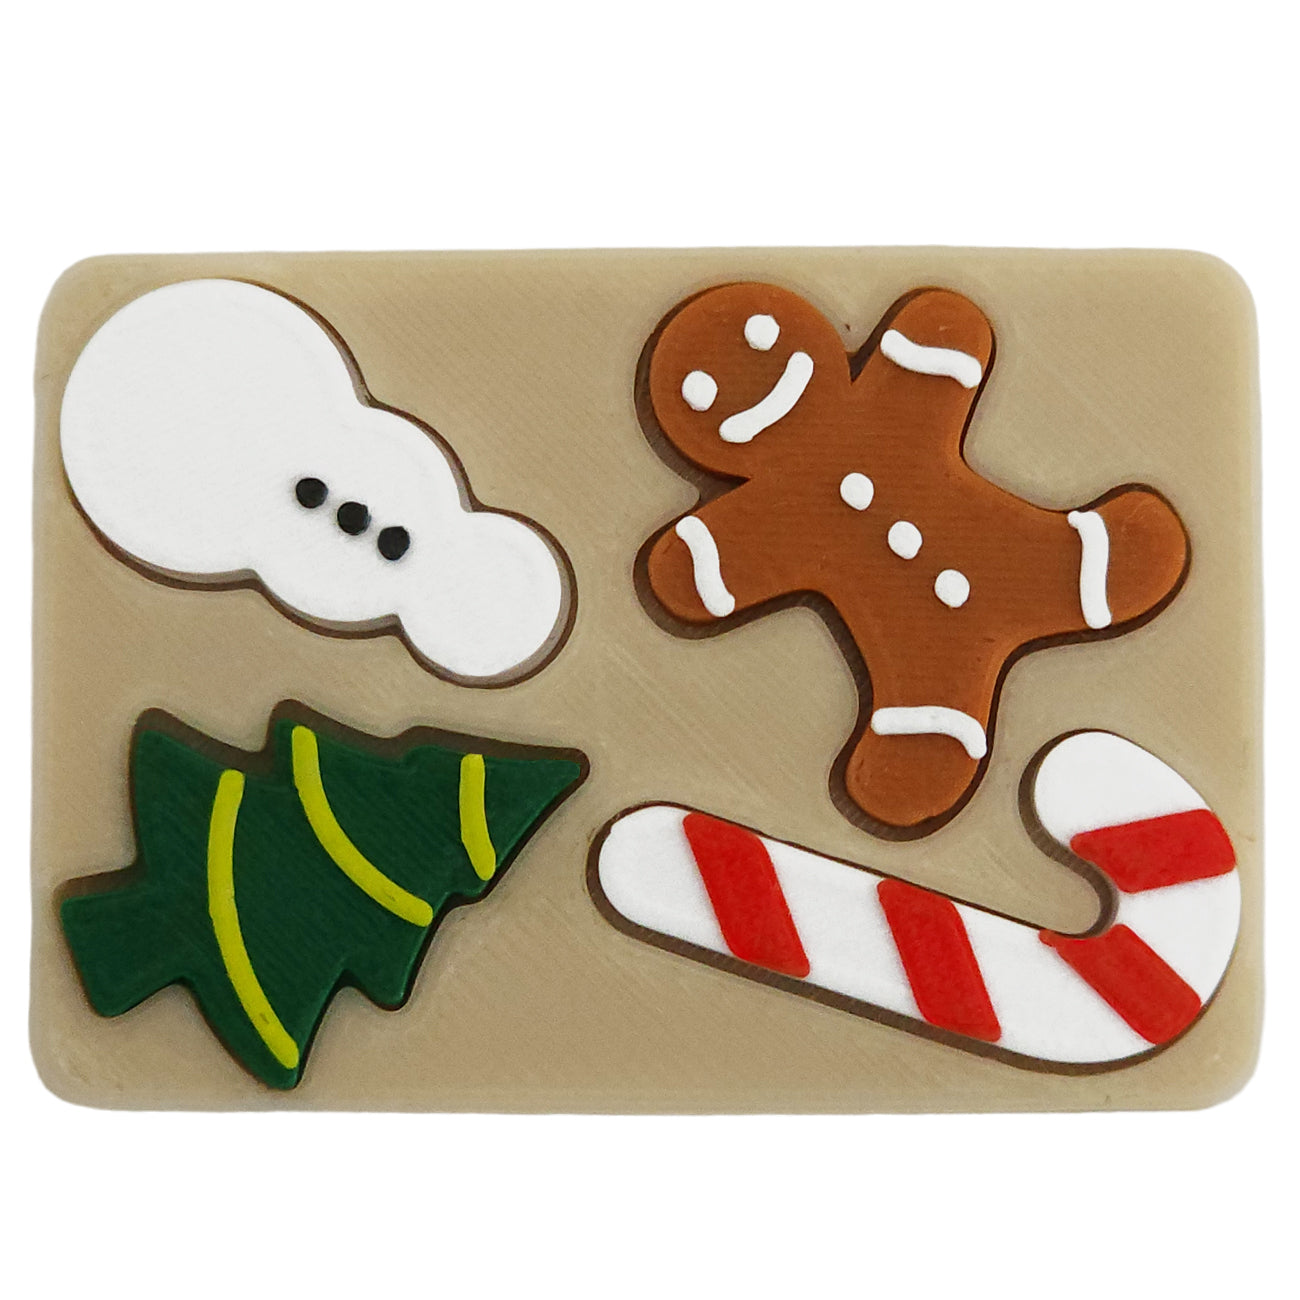 Miniature puzzle elf prop with a snowman piece, gingerbread man piece, candy can piece and Christmas tree piece